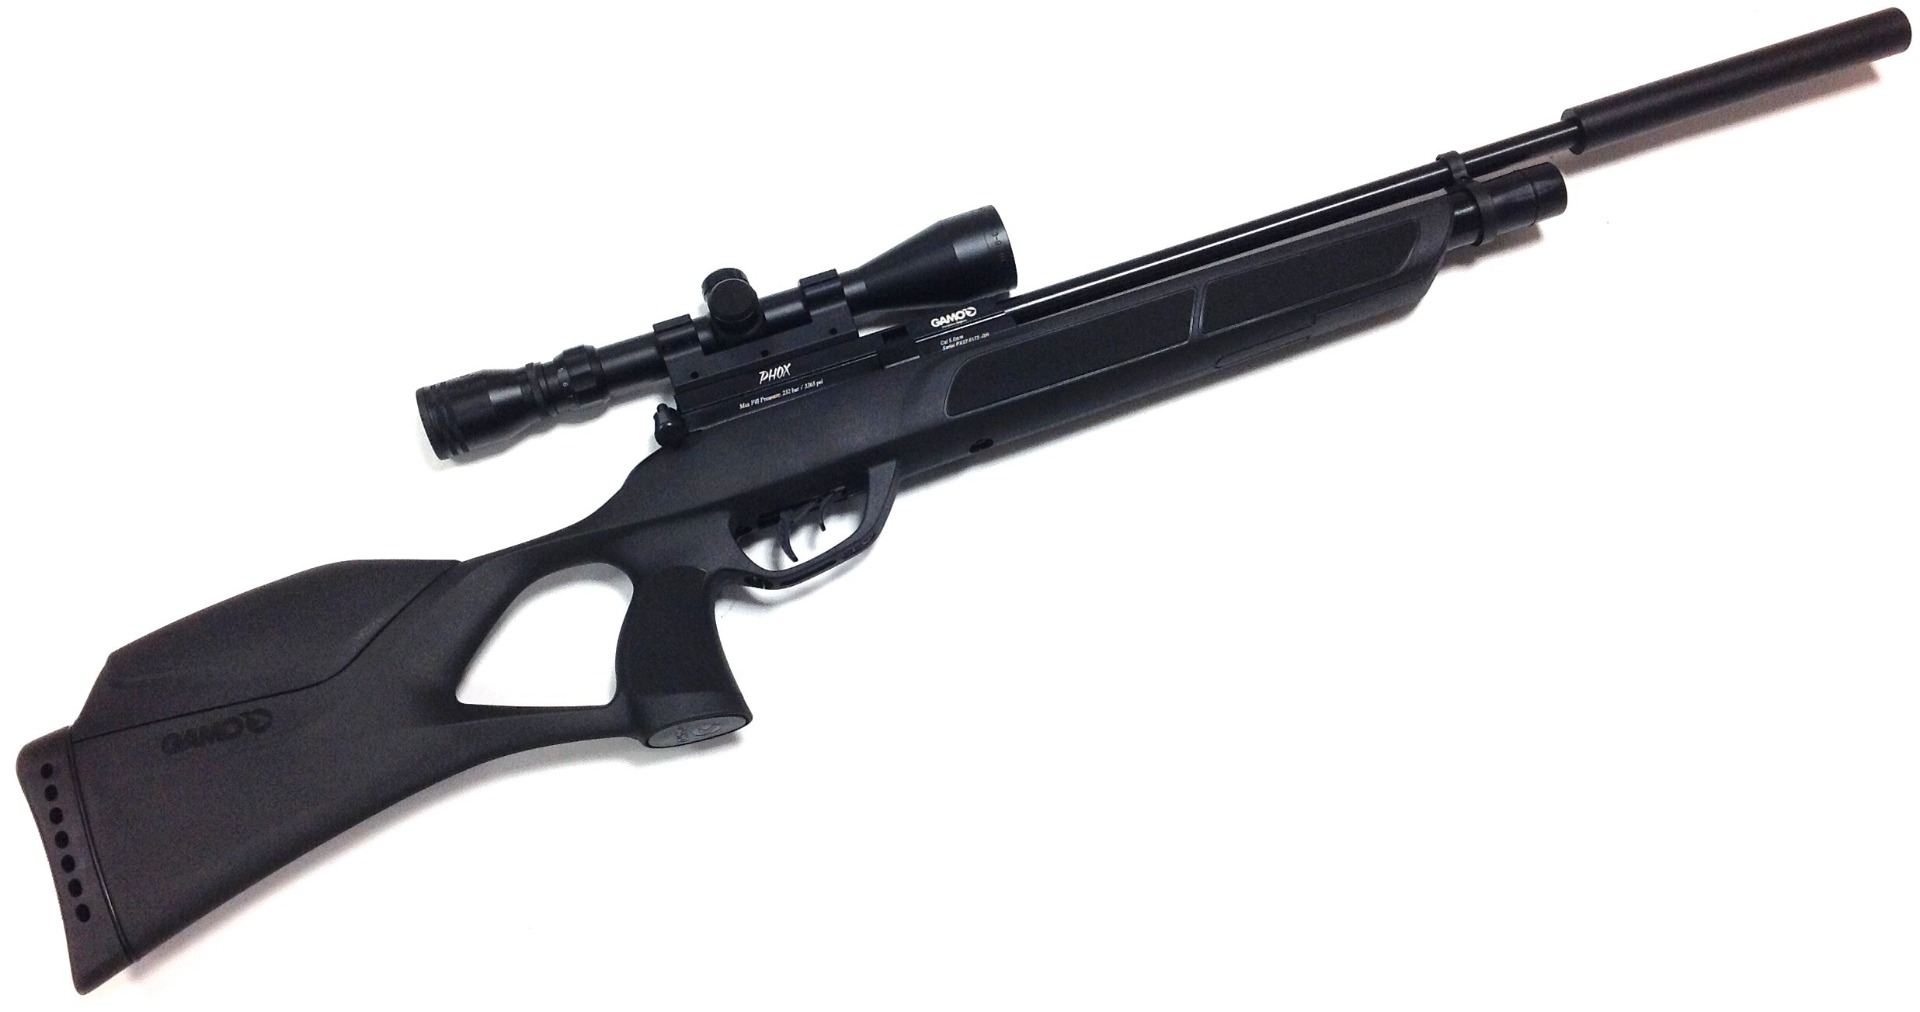 Gamo Phox .22 Pre-Charged Pneumatic Air Rifle Outfit